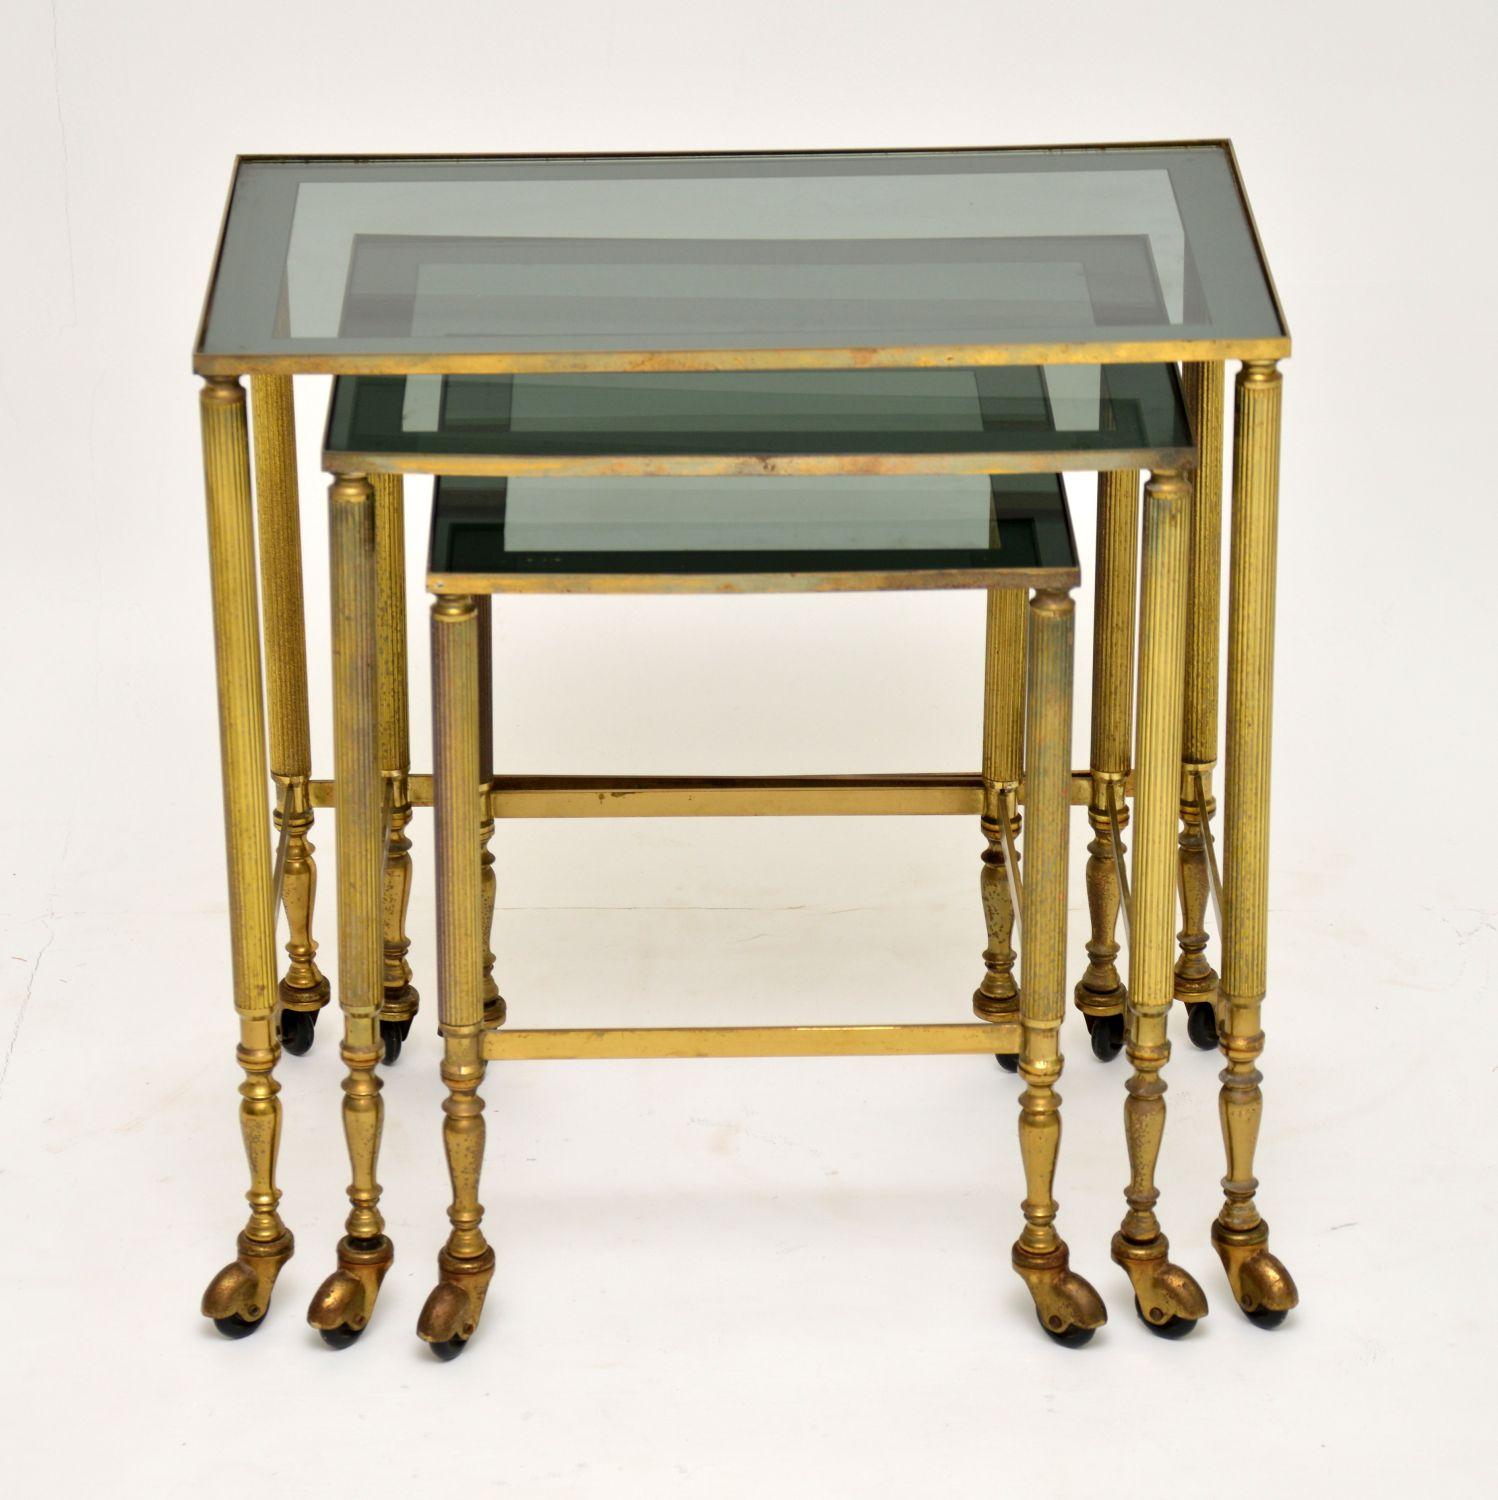 A stylish and well made vintage nest of brass tables on casters, these were made in France and date from the 1950s-1960s. They are of great quality and are in lovely vintage condition, with only some minor surface wear here and there.

Measures: